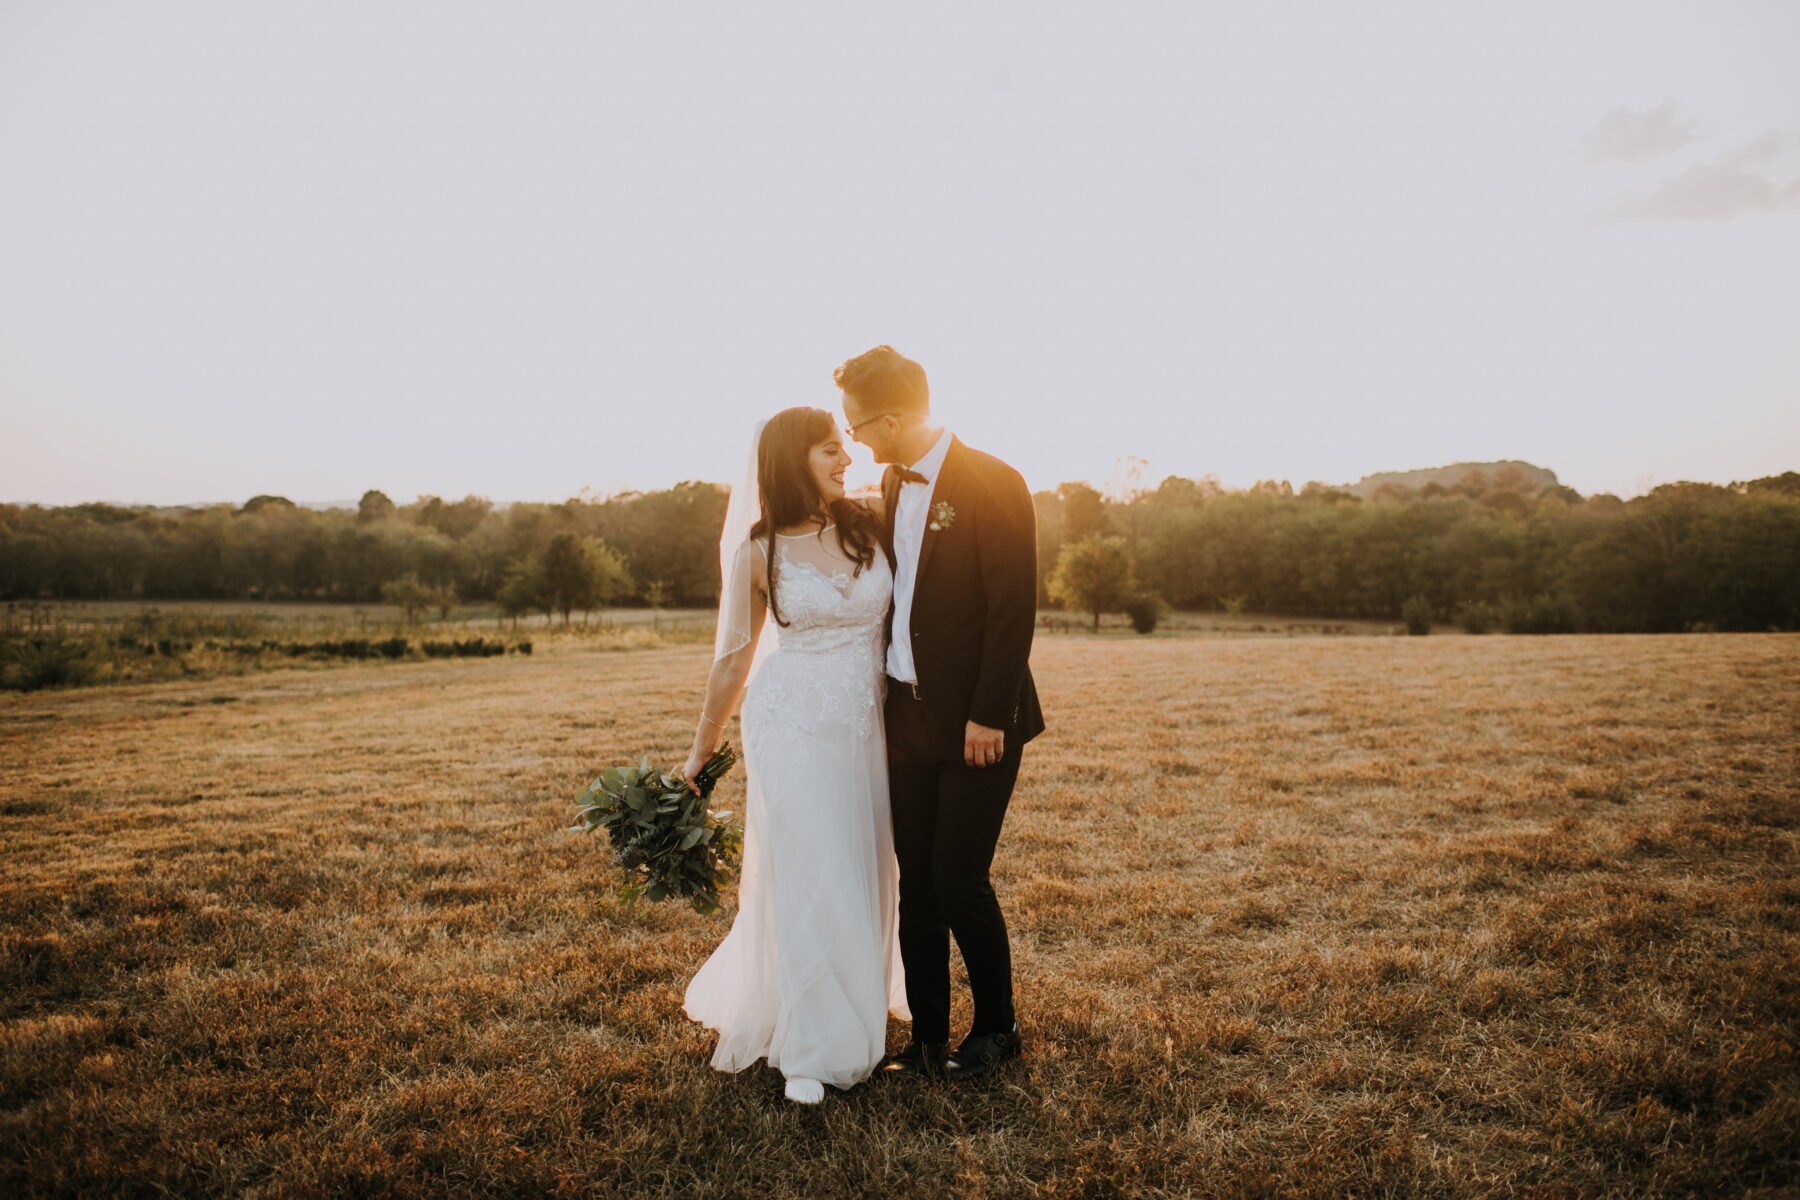 Nashville Wedding with Beautiful Views by Teale Photography featured on Nashville Bride Guide